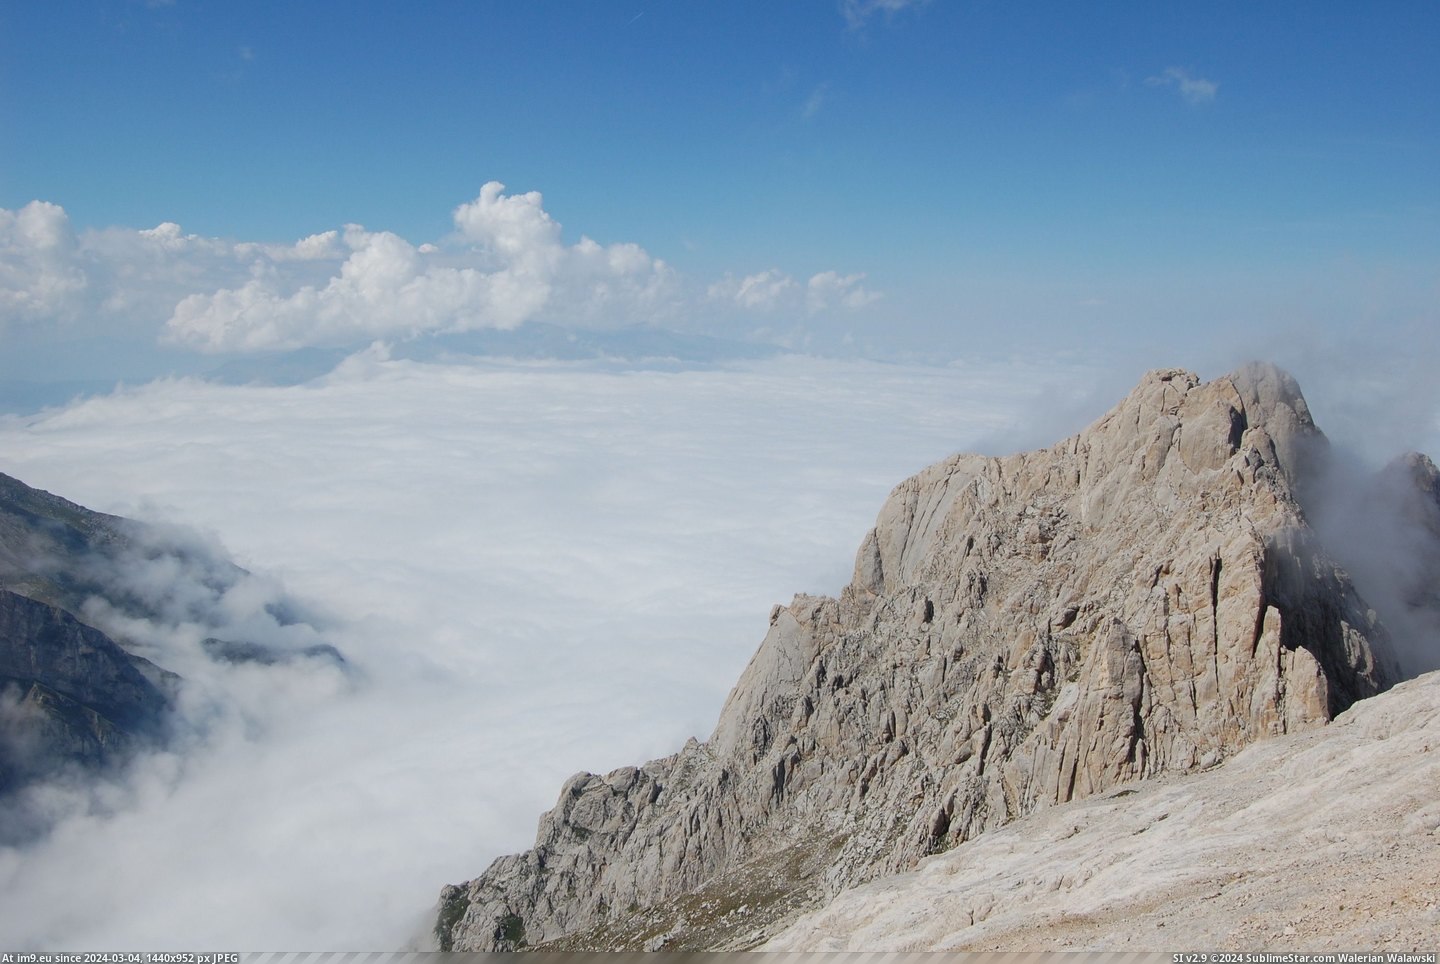 #Mountains #Italy #3008x2000 #Gran #Clouds #Central [Earthporn] Over the clouds - Gran Sasso mountains, Abruzzo, Central Italy  - [3008x2000] Pic. (Obraz z album My r/EARTHPORN favs))